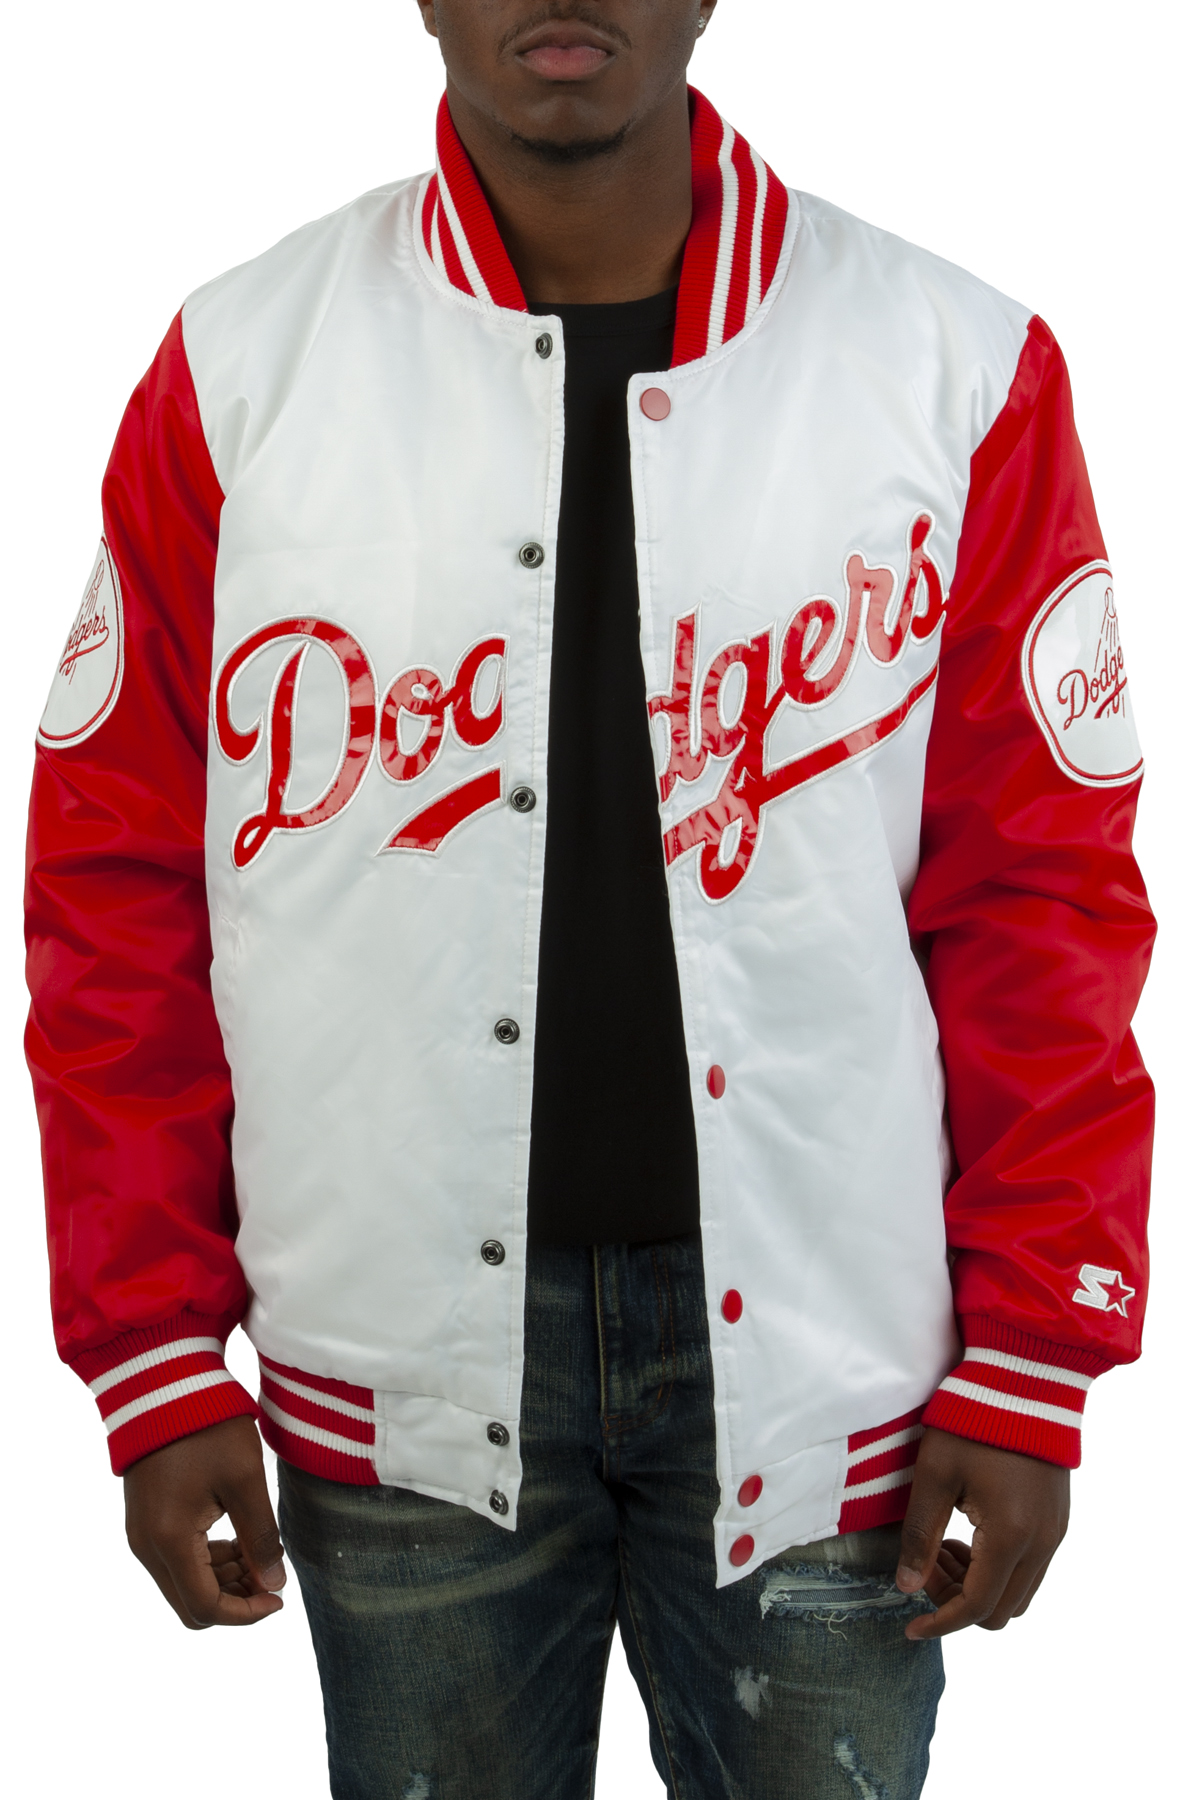 LA Lakers White and Red Satin Jacket